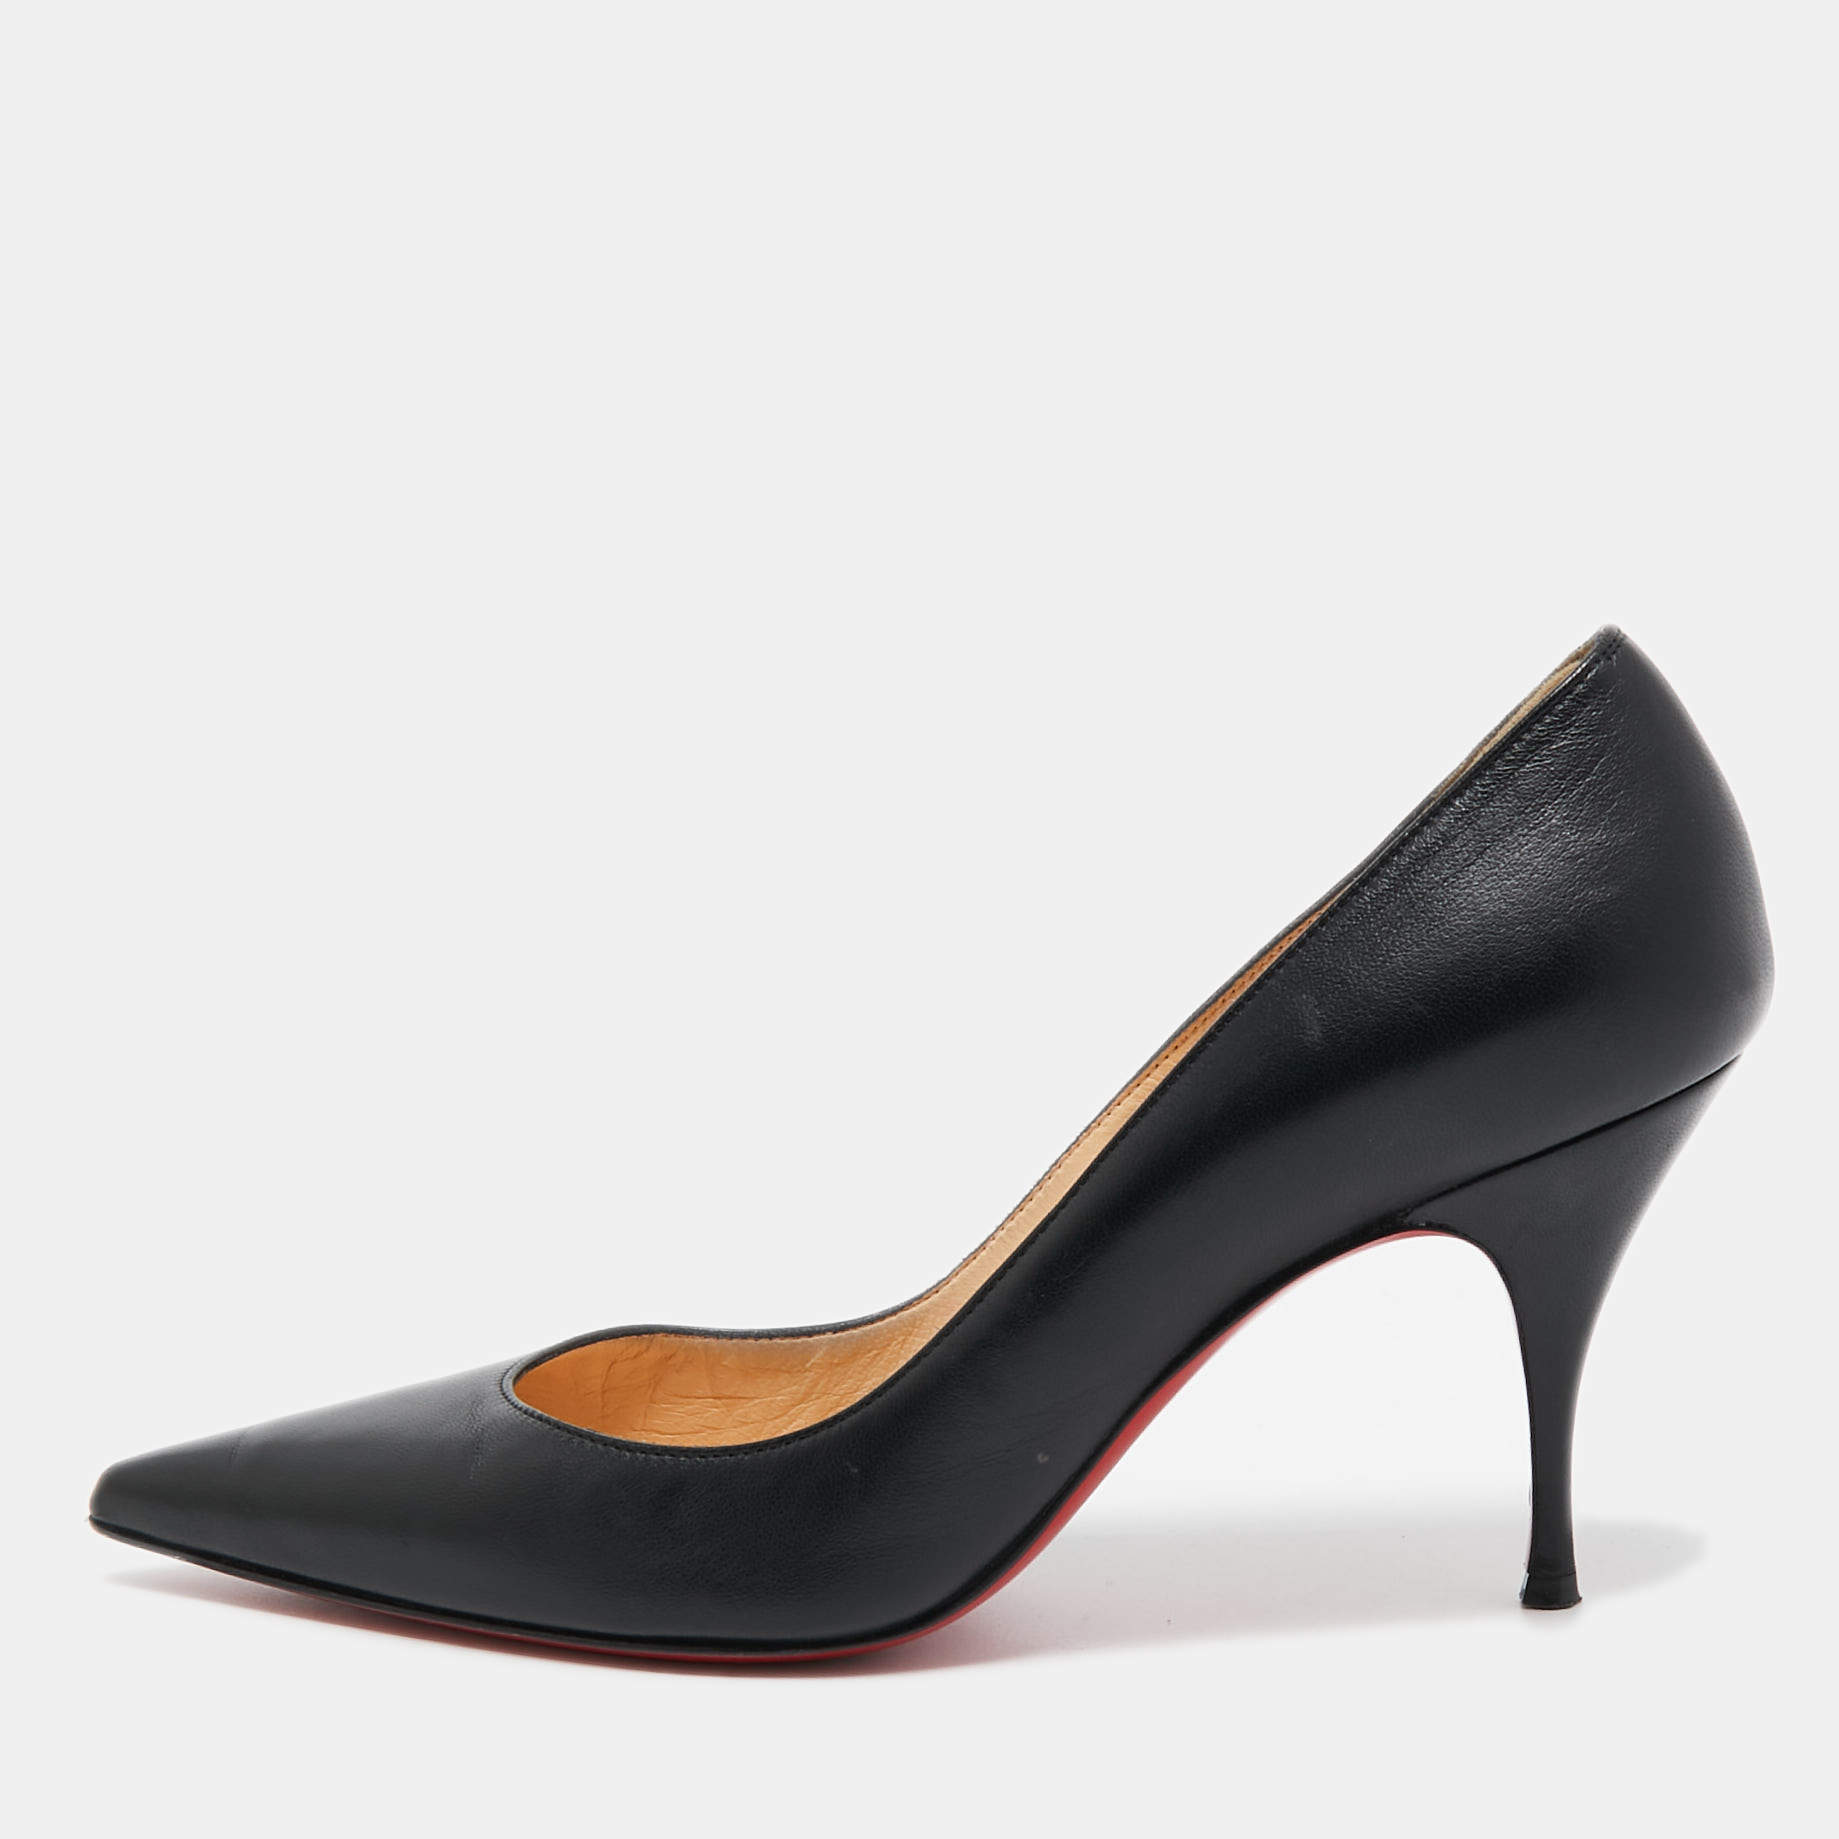 Christian Louboutin Black Leather Pointed Toe Pumps Size 36